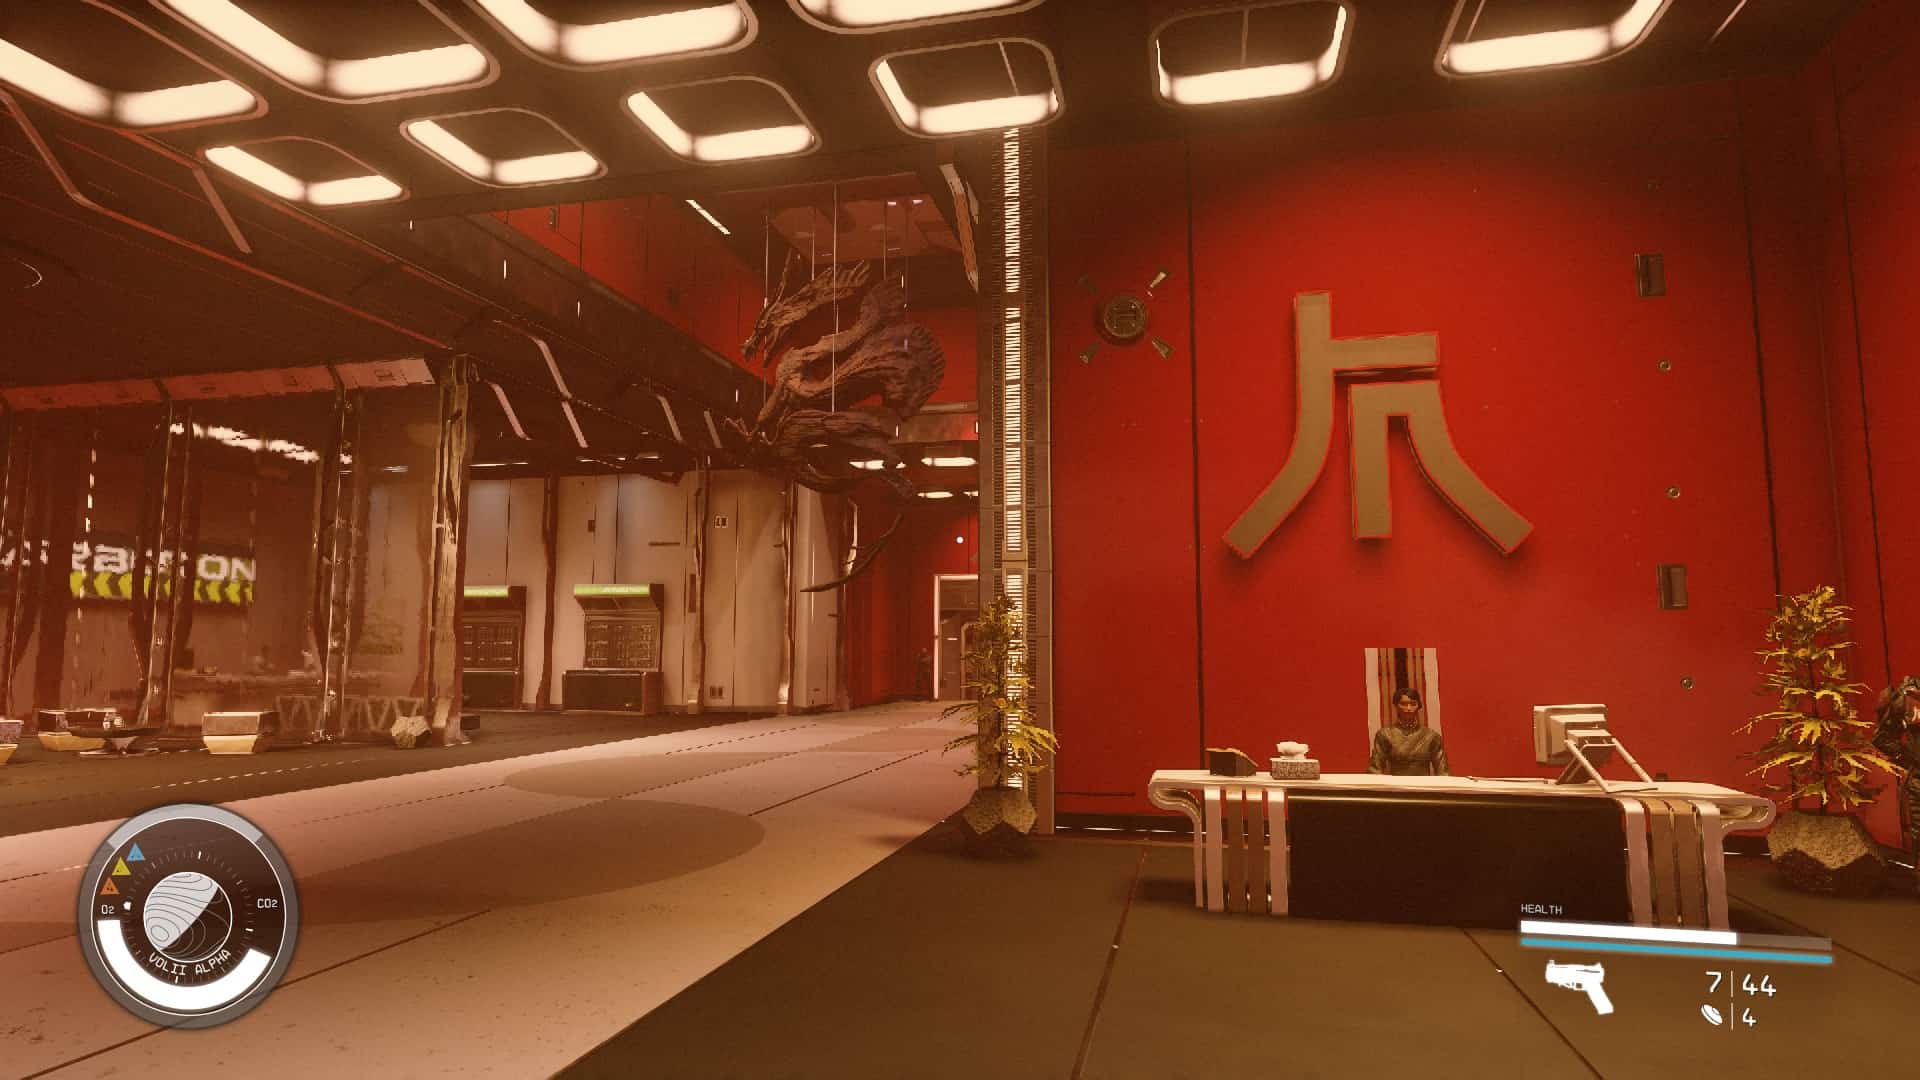 Starfield tips and tricks: The lobby to Ryujin Industries, one of the factions in Starfield.